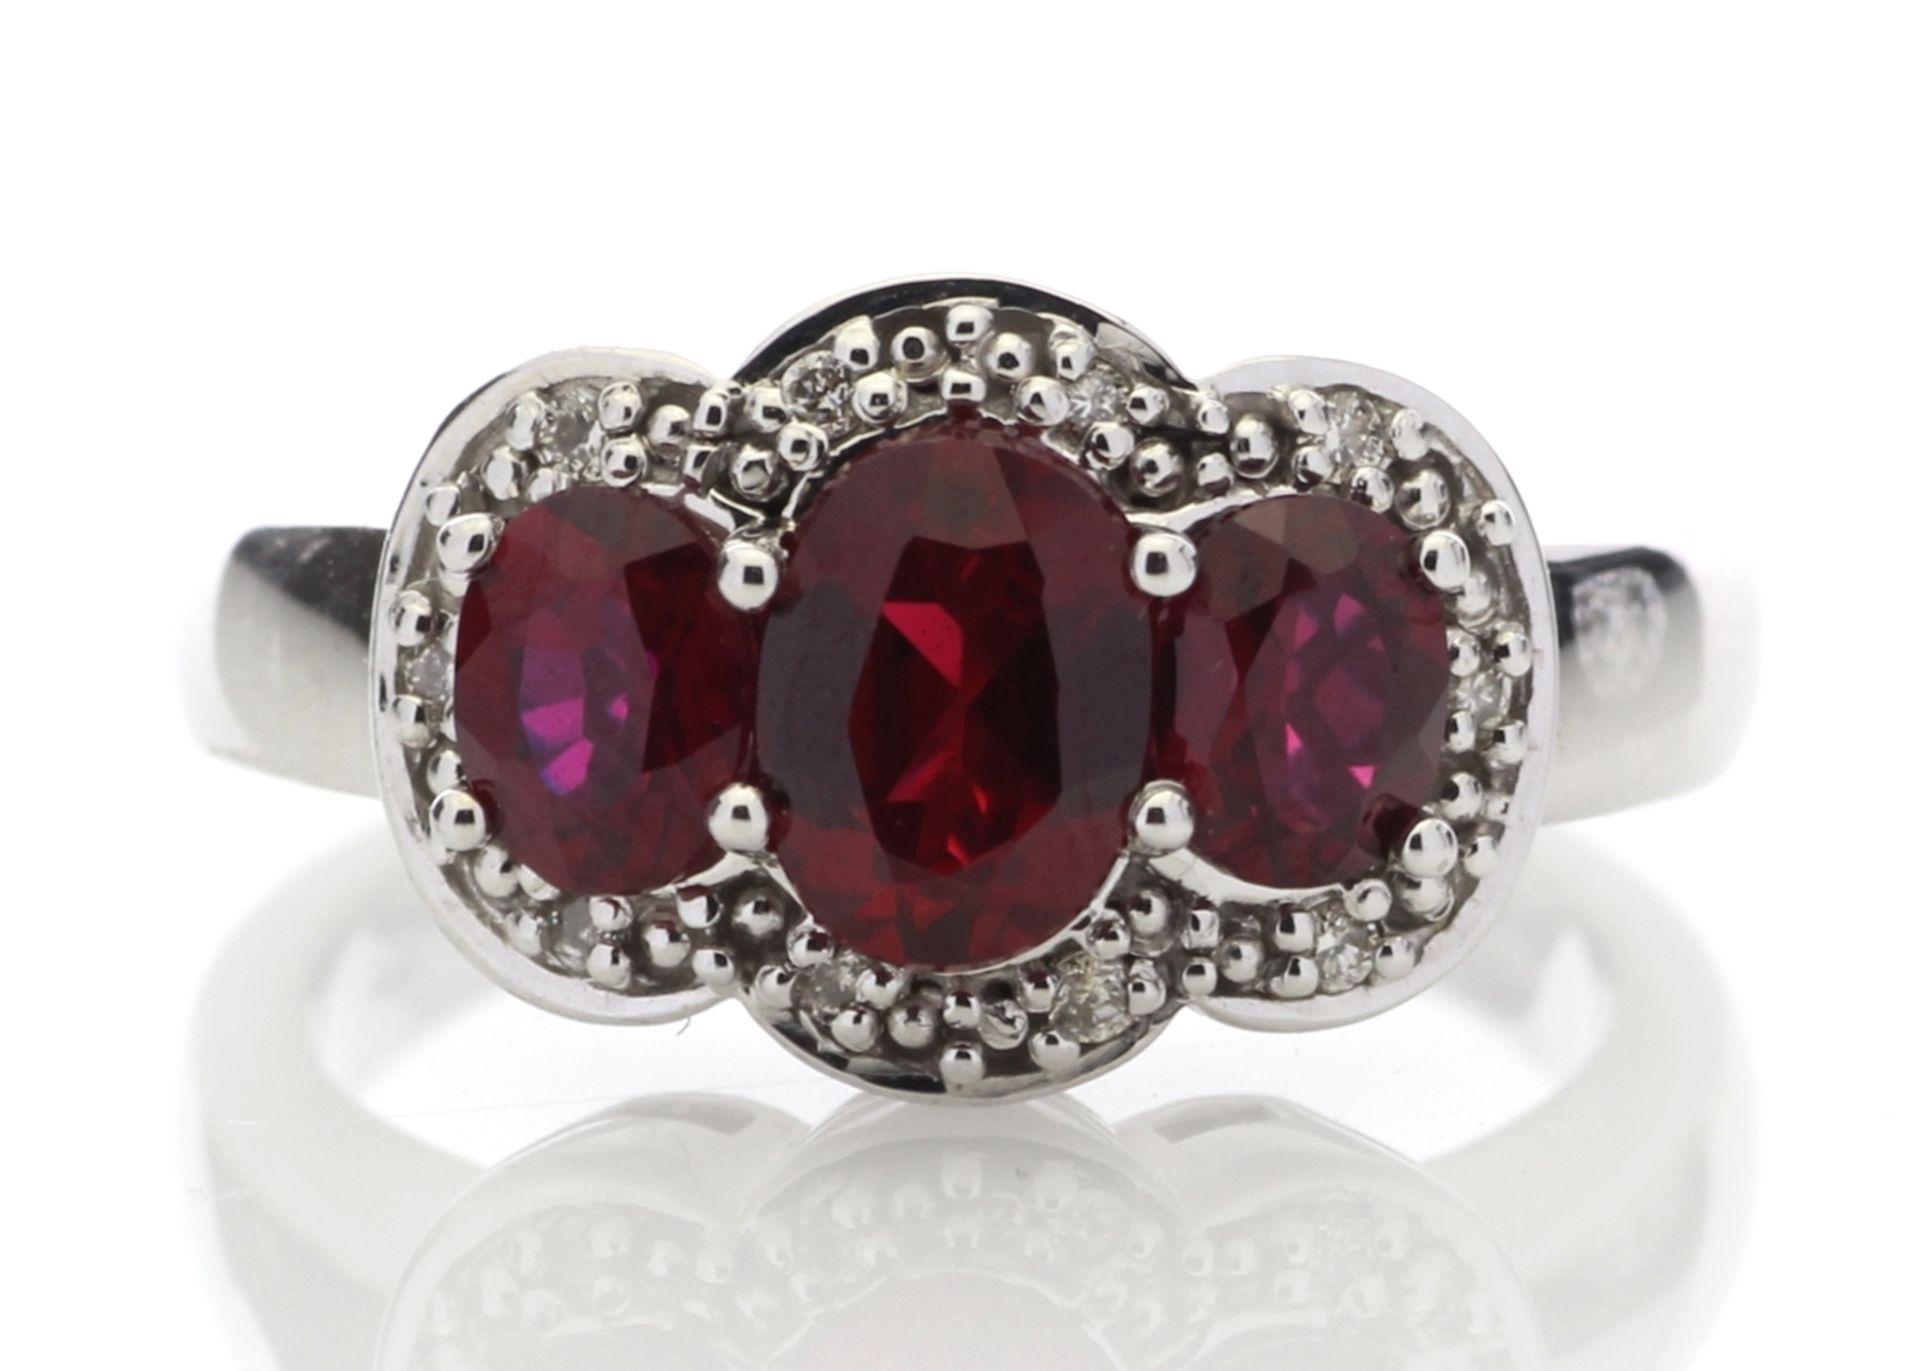 9ct White Gold Created Ruby Diamond Cluster Ring 0.08 Carats - Valued by AGI £955.00 - 9ct White